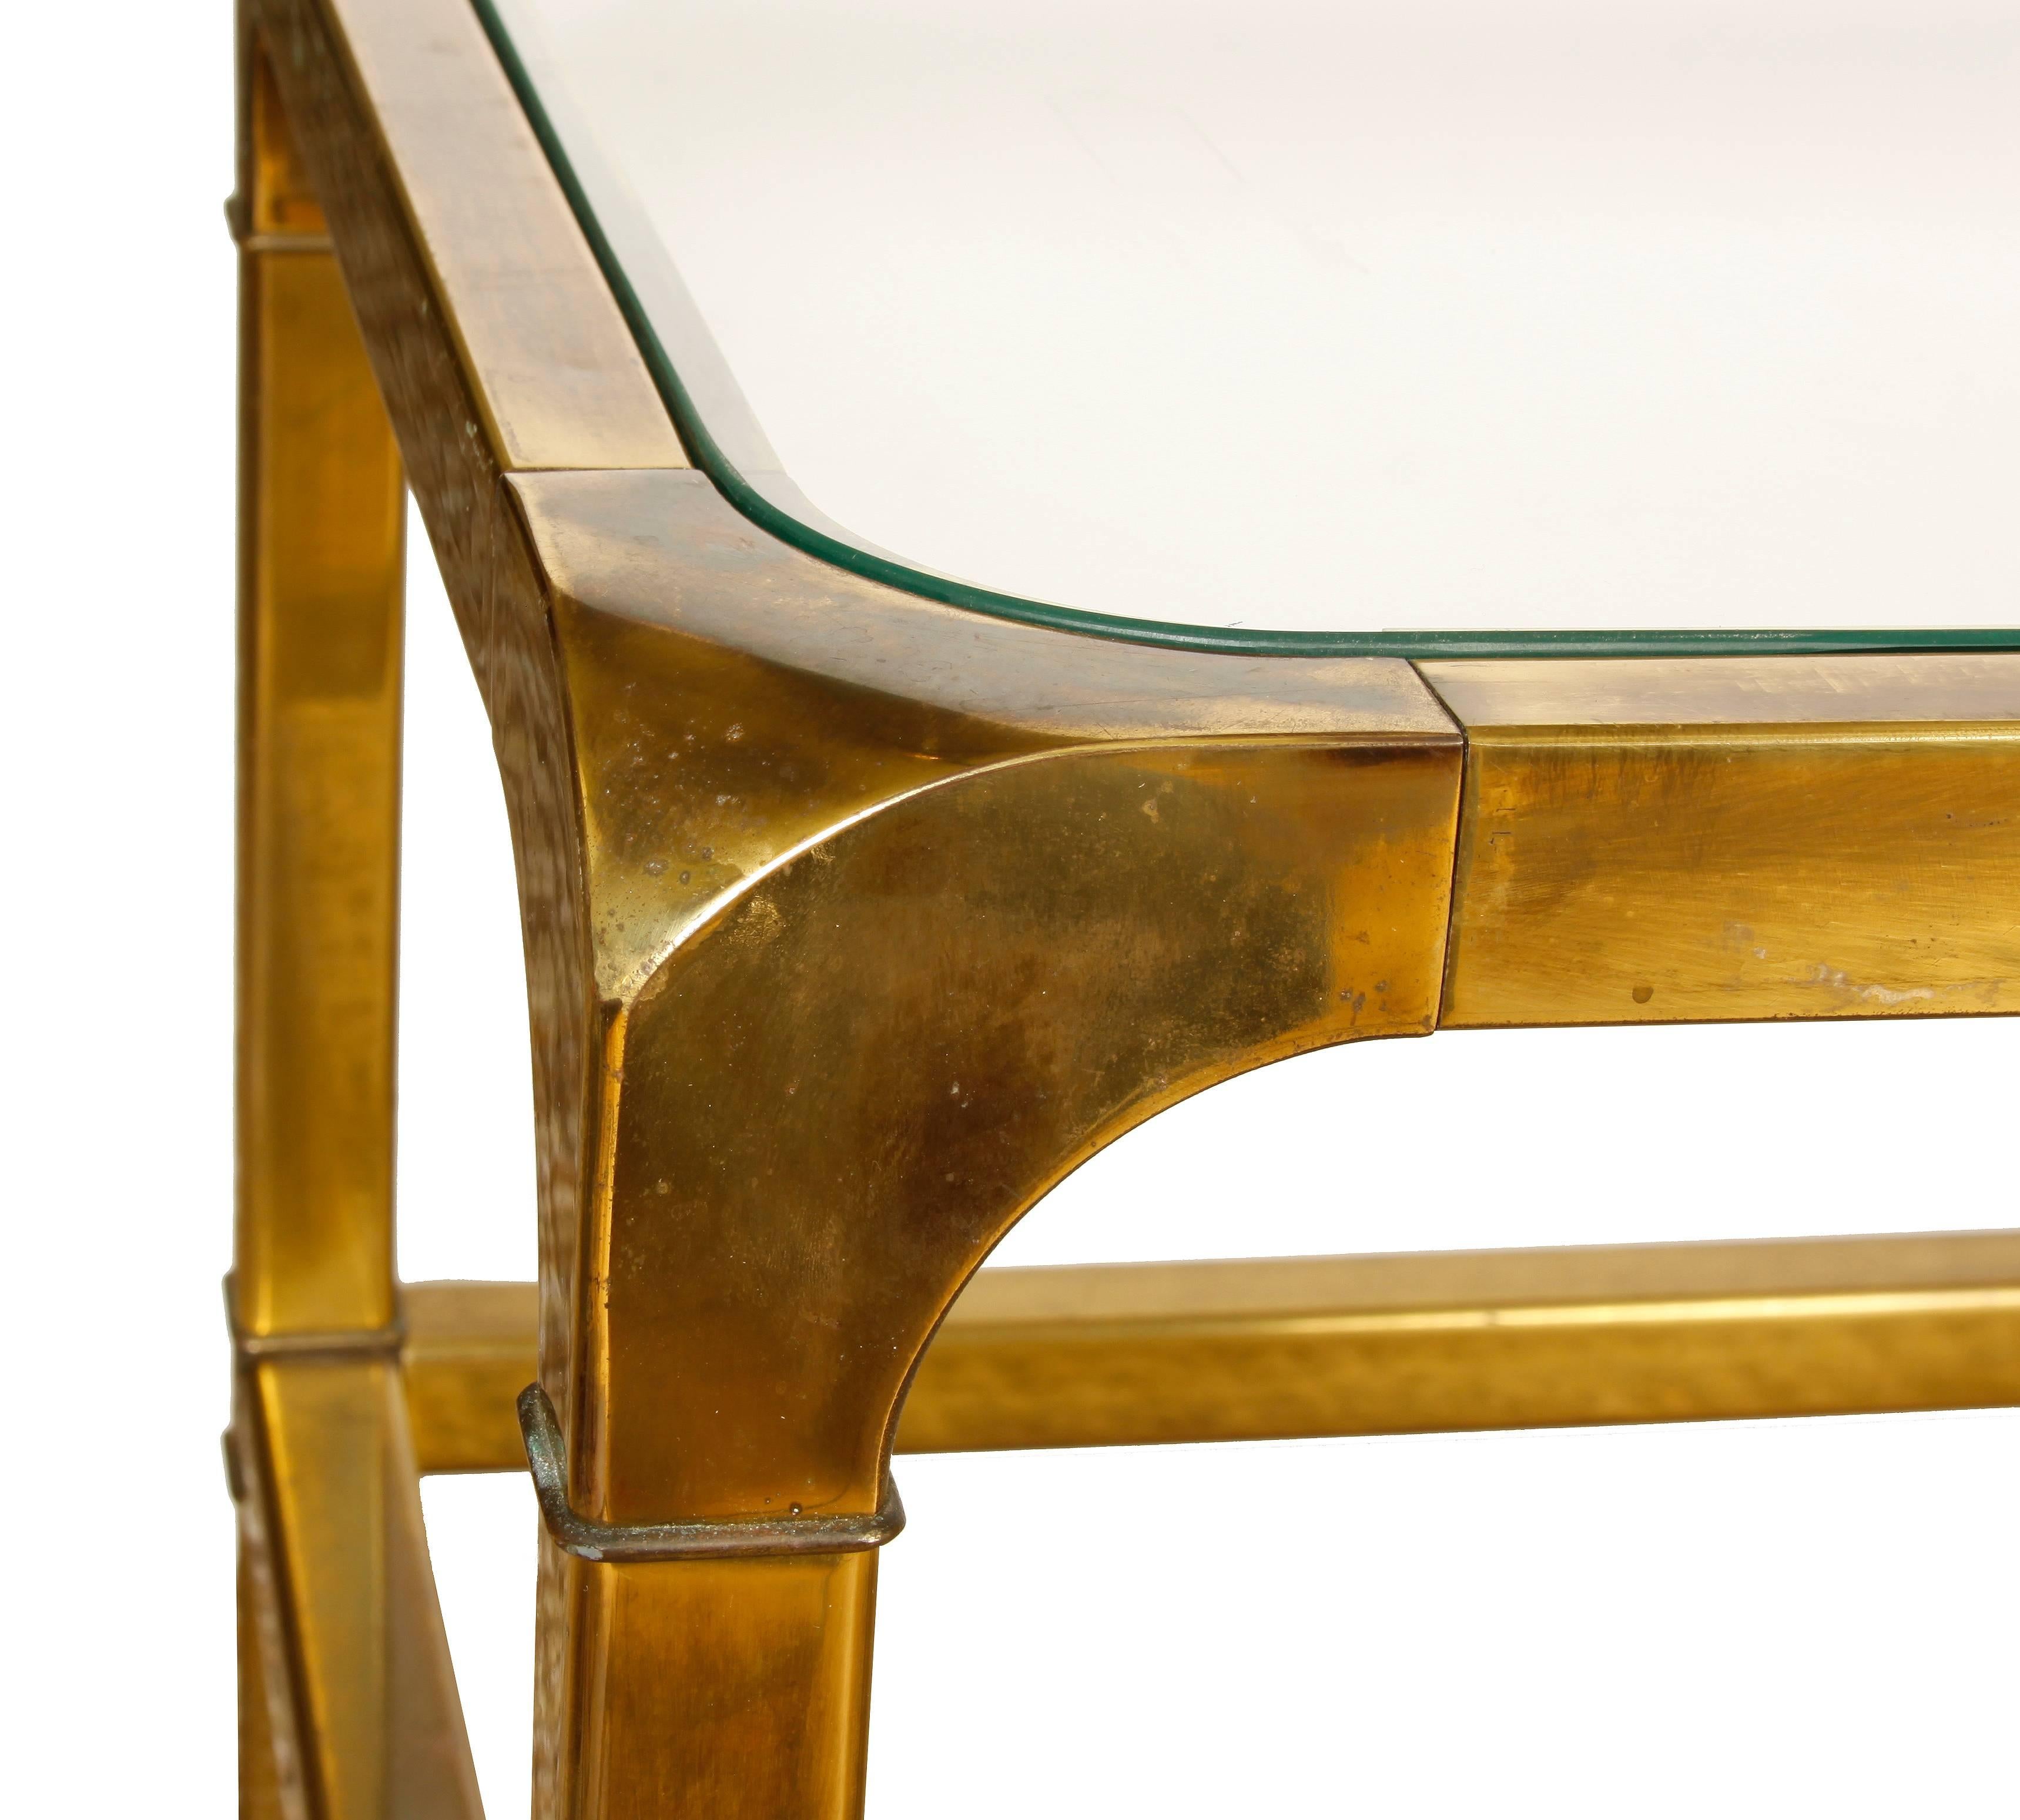 Mastercraft brass and glass cocktail table. Rectangular with rounded corners 